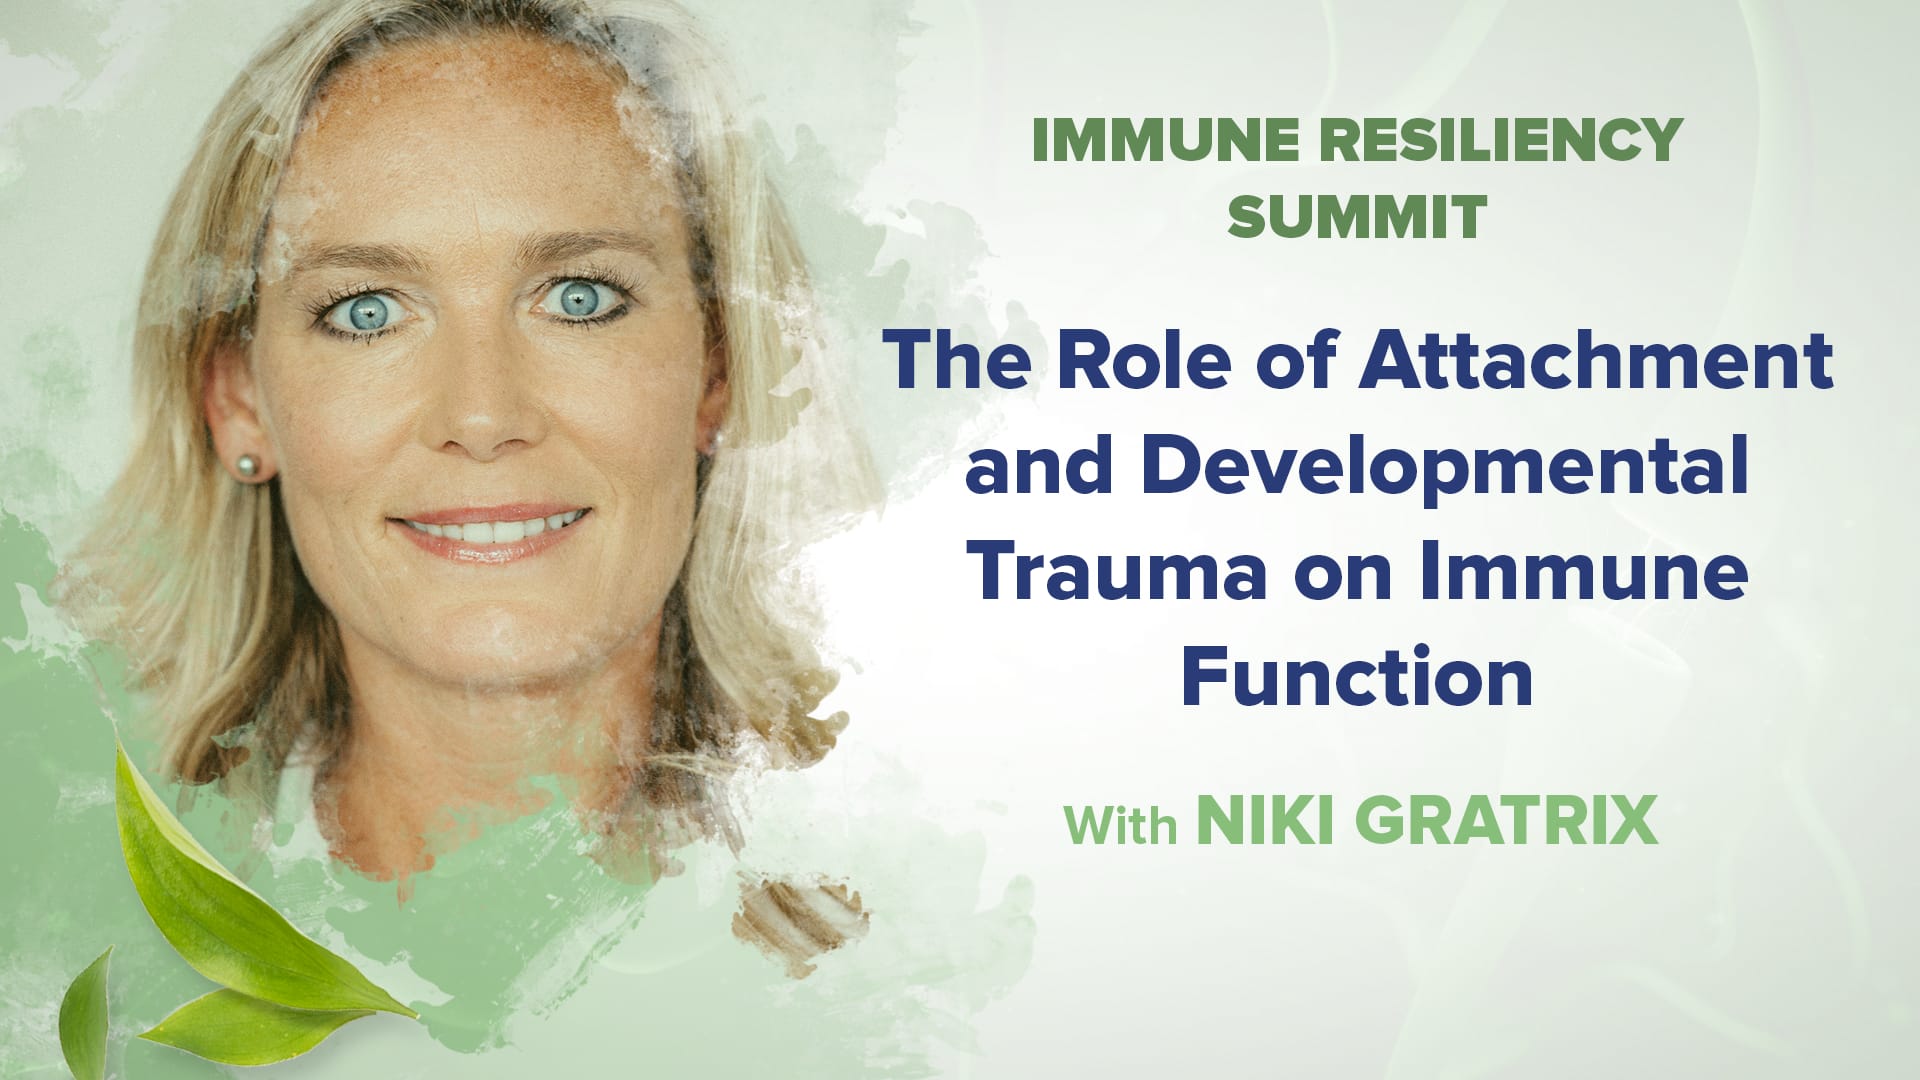 The Role of Attachment and Developmental Trauma on Immune Function